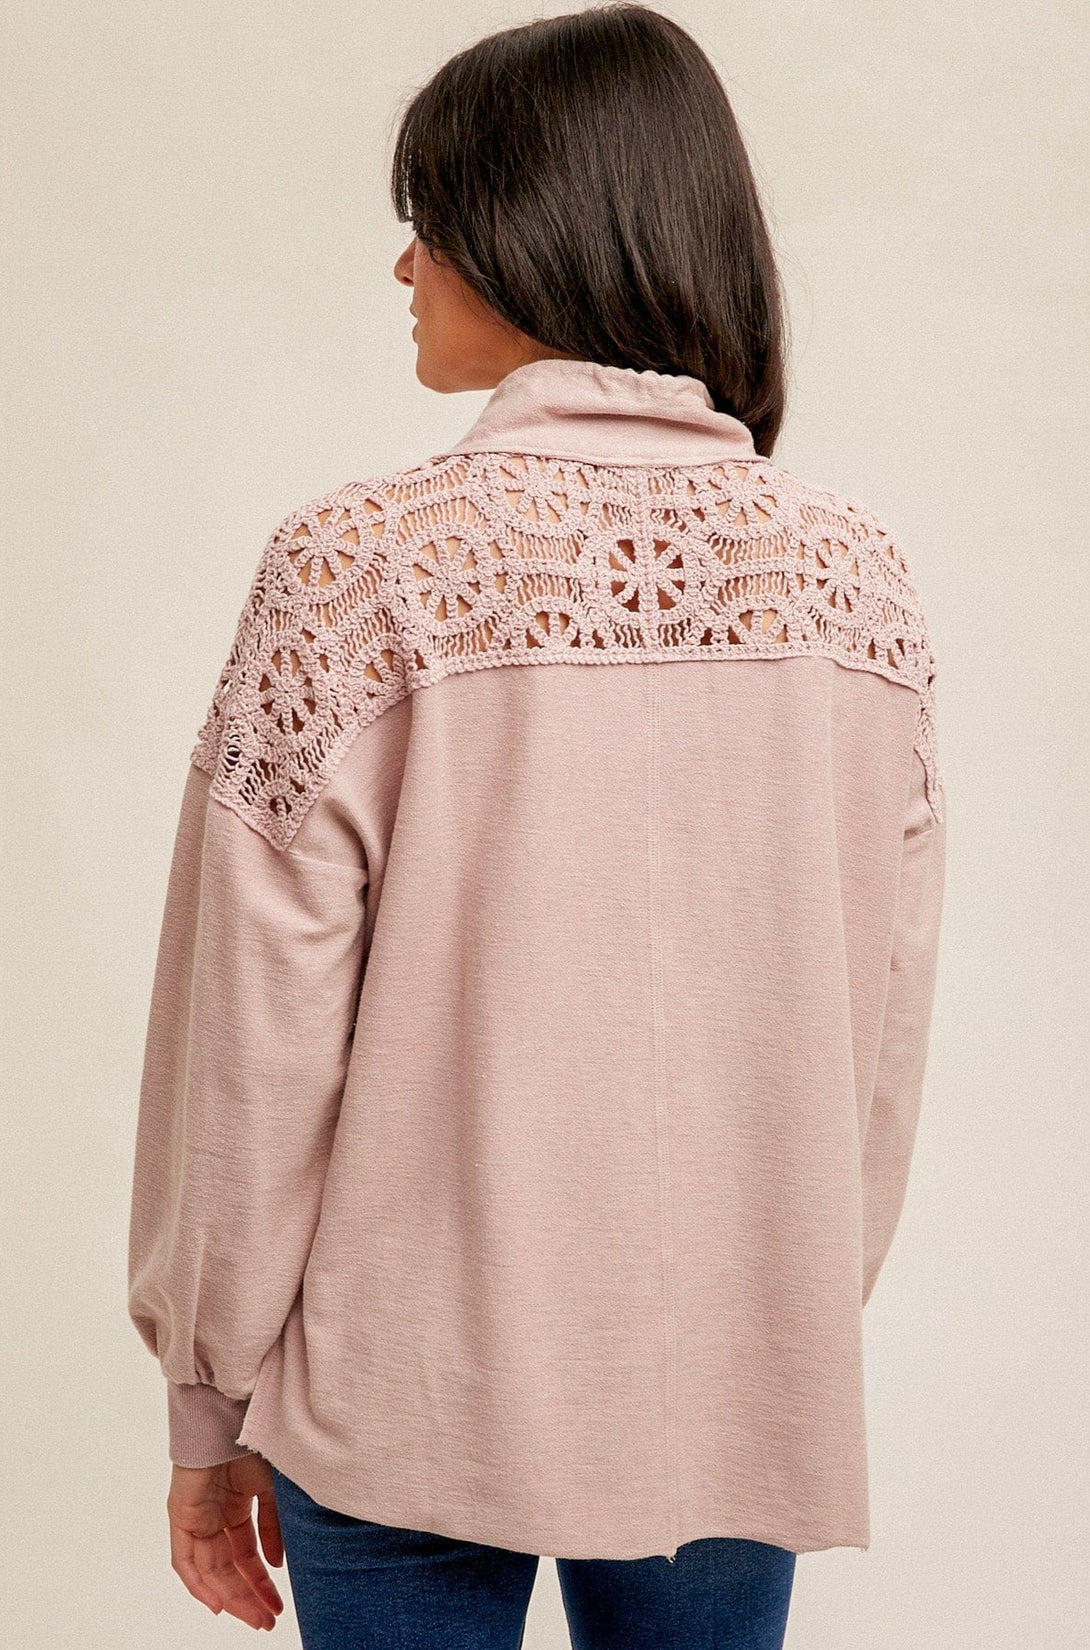 Hem & Thread Crochet Lace Contrast French Terry Pullover